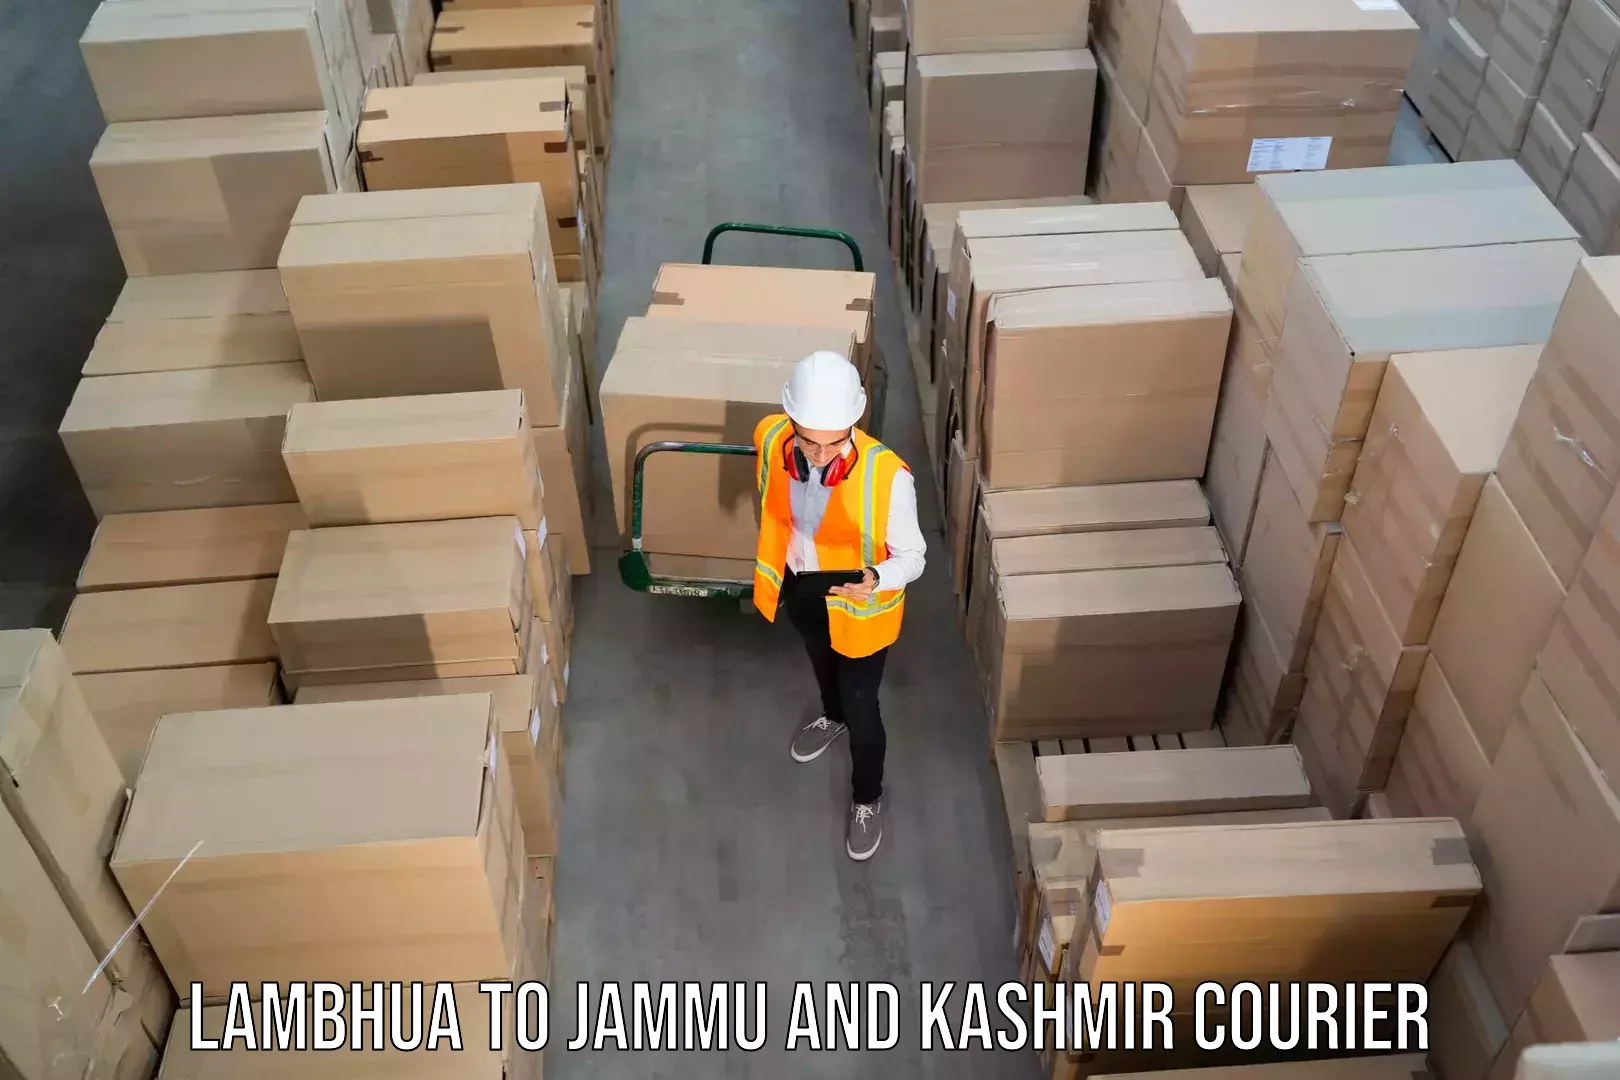 Reliable courier service Lambhua to Jammu and Kashmir